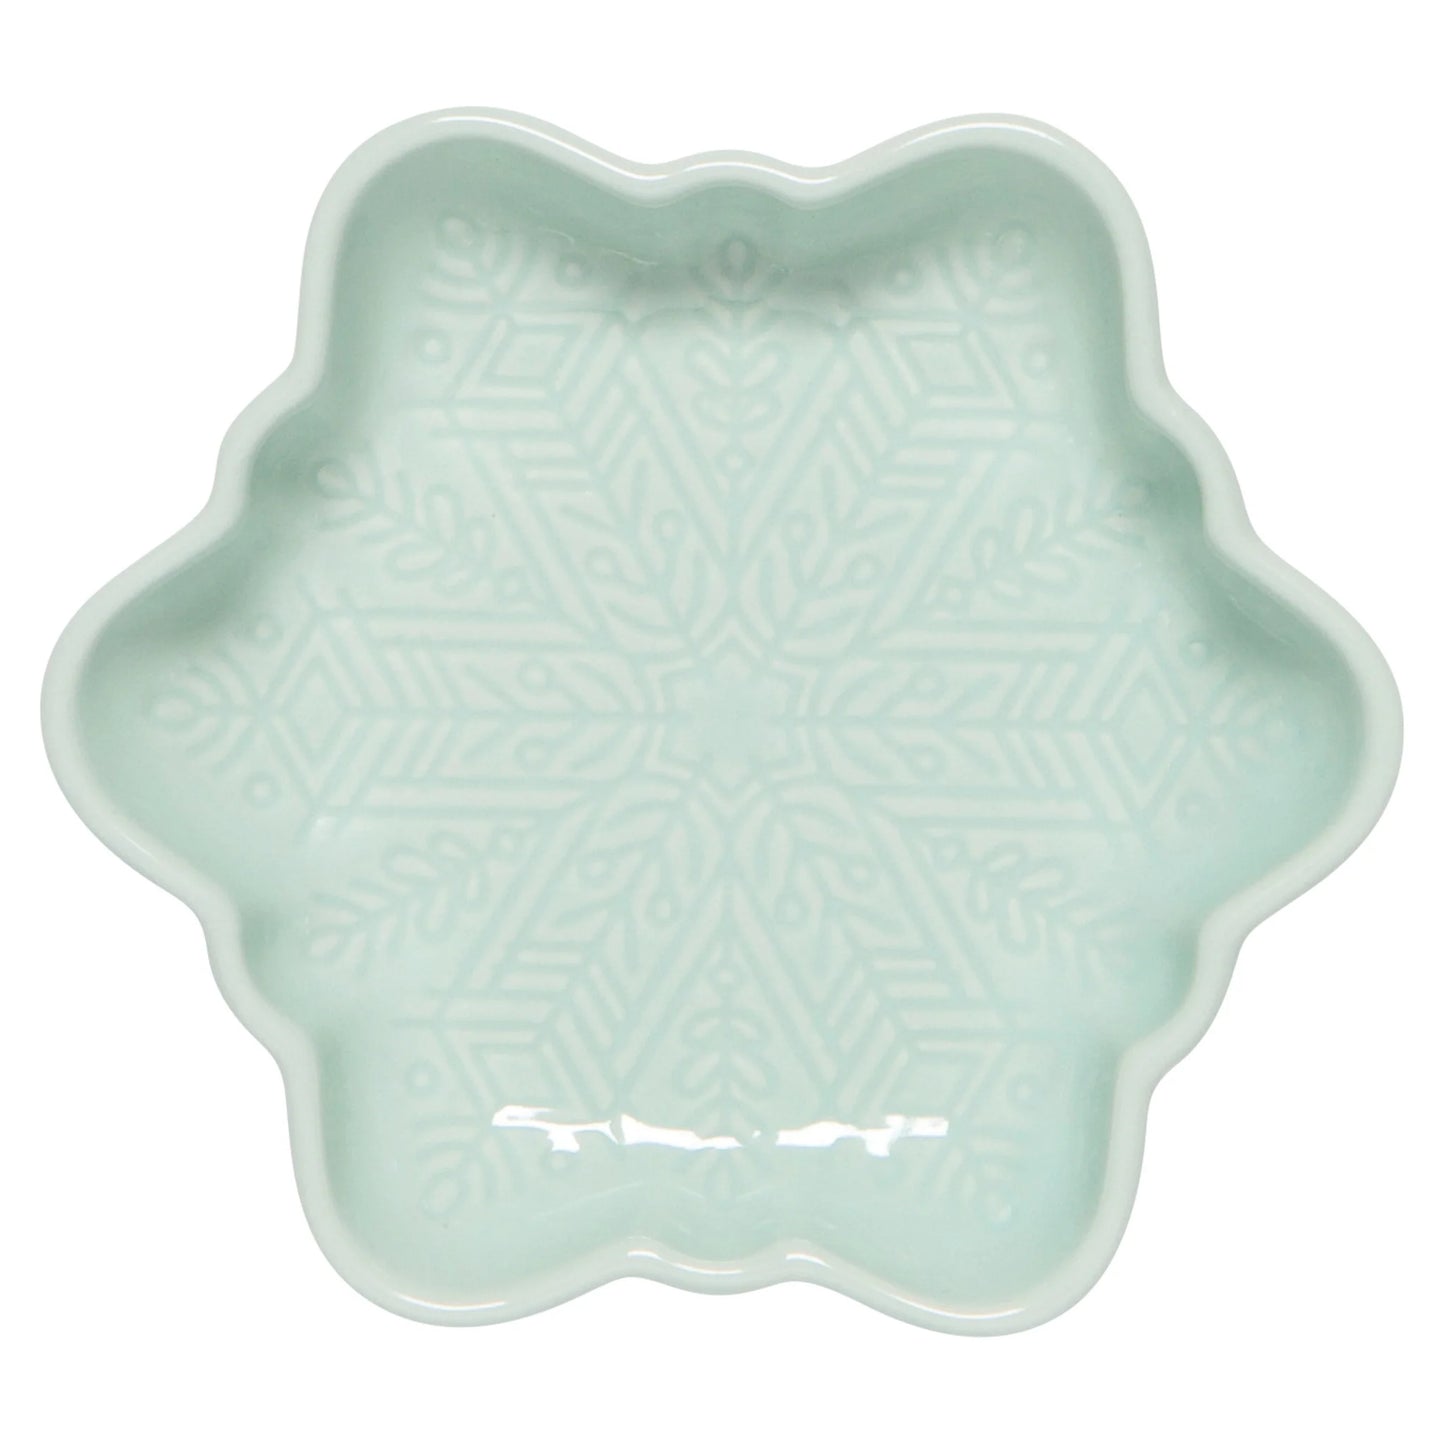 Dish - SHAPPED Dipping Dish CHOICE OF COLOR